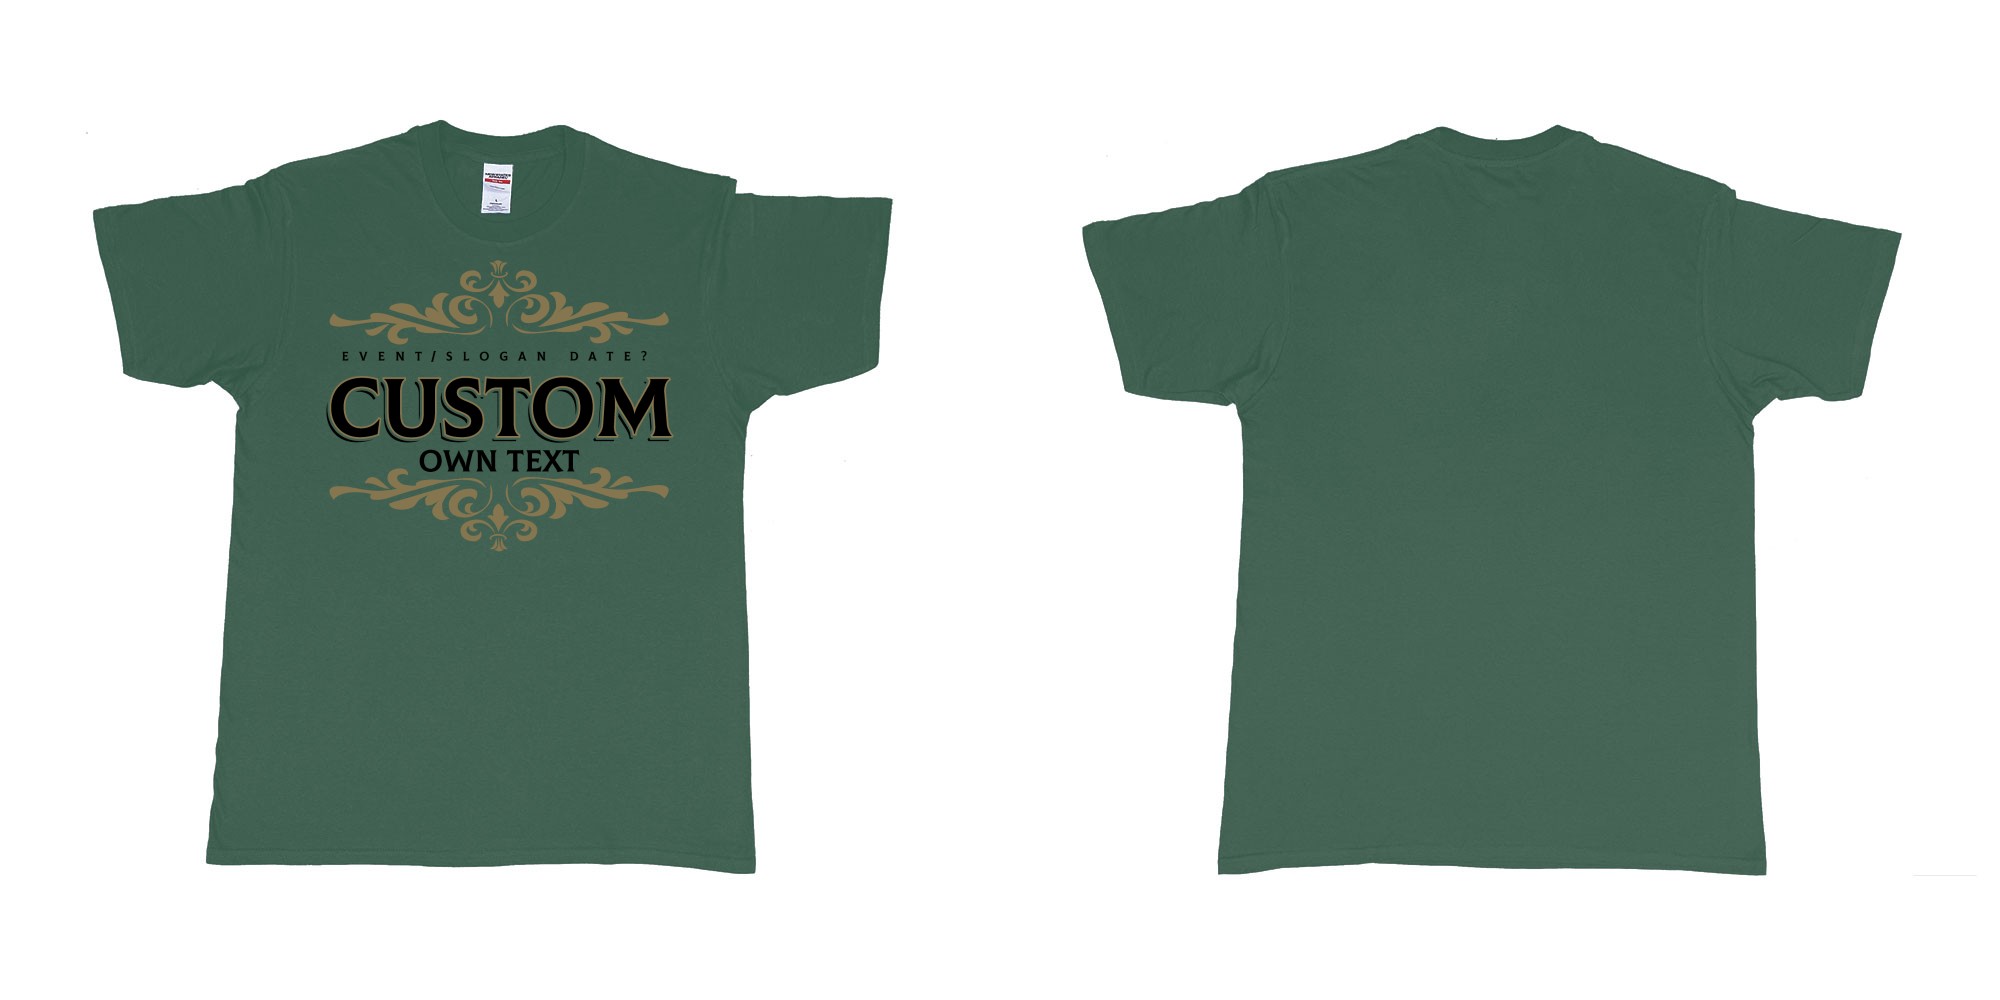 Custom tshirt design el diamante del cielo tequila elegant logo in fabric color forest-green choice your own text made in Bali by The Pirate Way